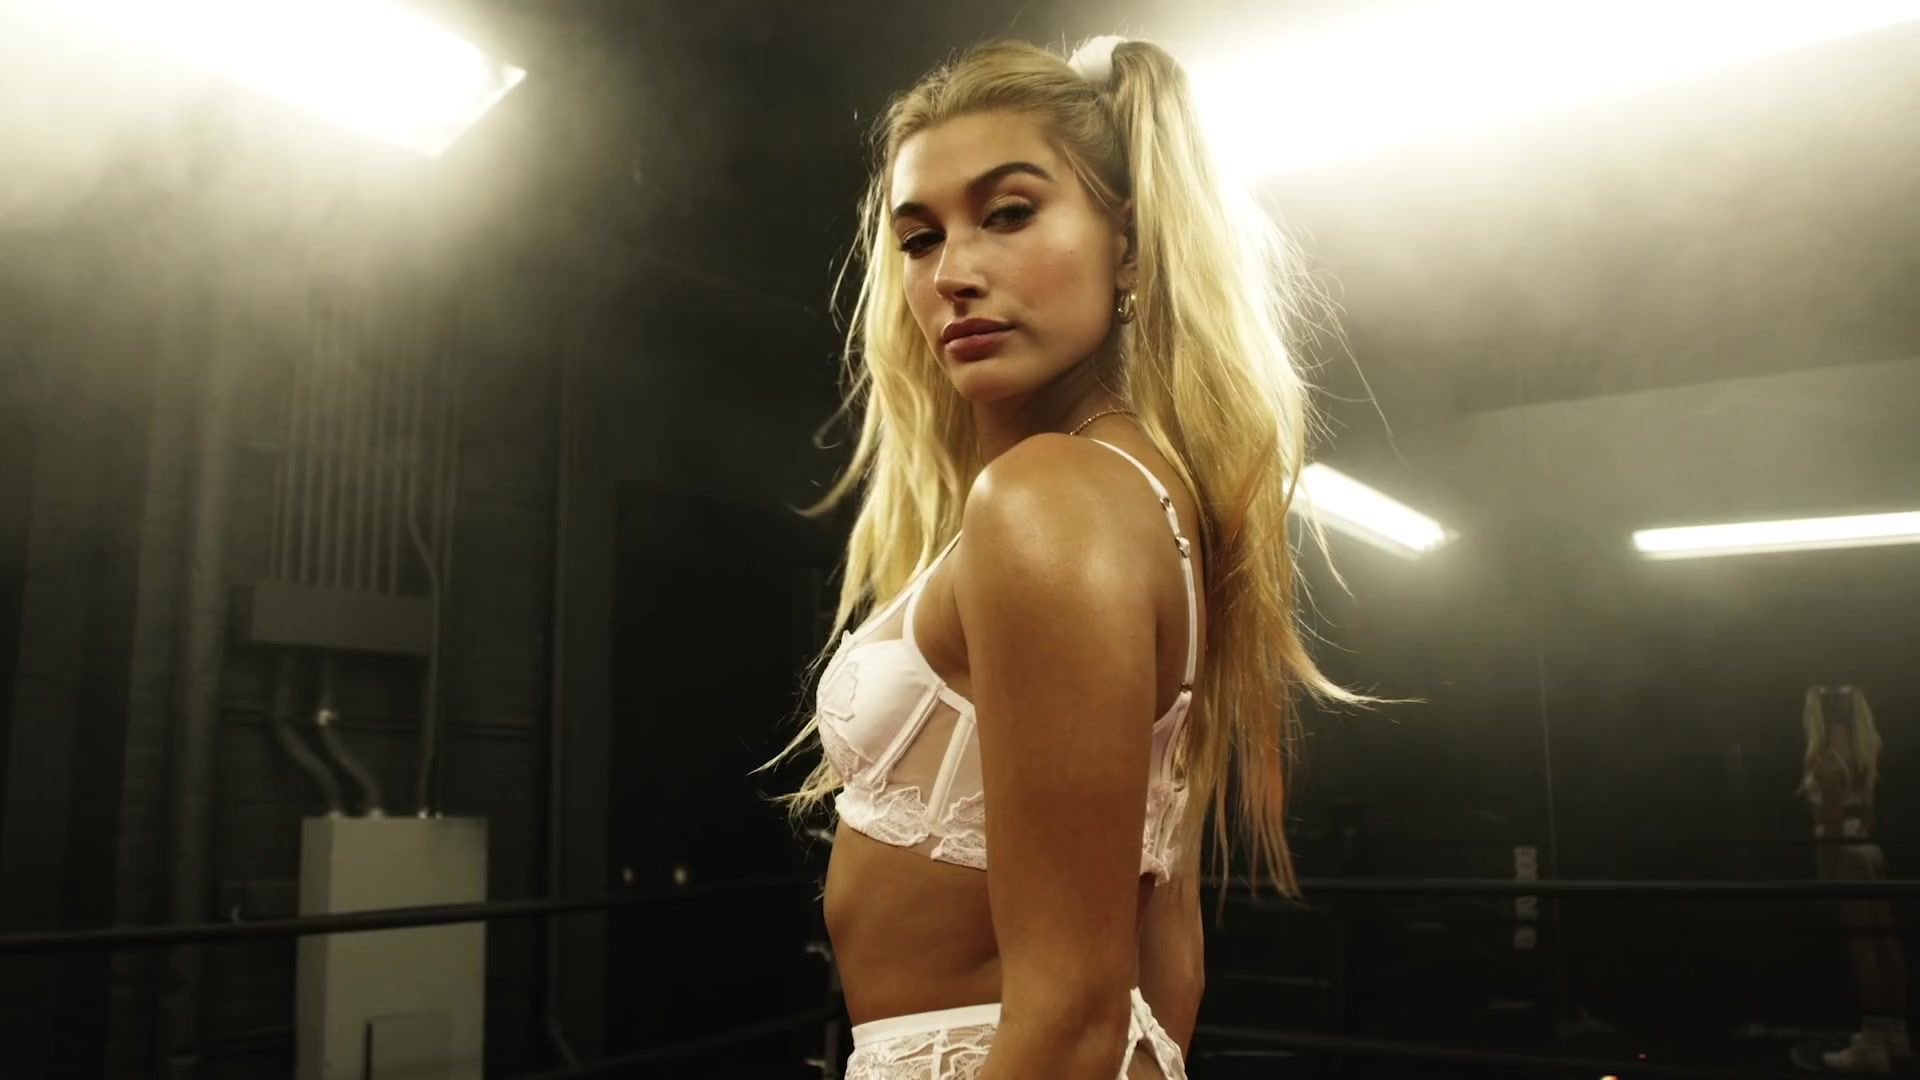 Anal Play Sexy Love Advent 2017 - Day 13 - Hailey Baldwin by Phil Poynter Movie